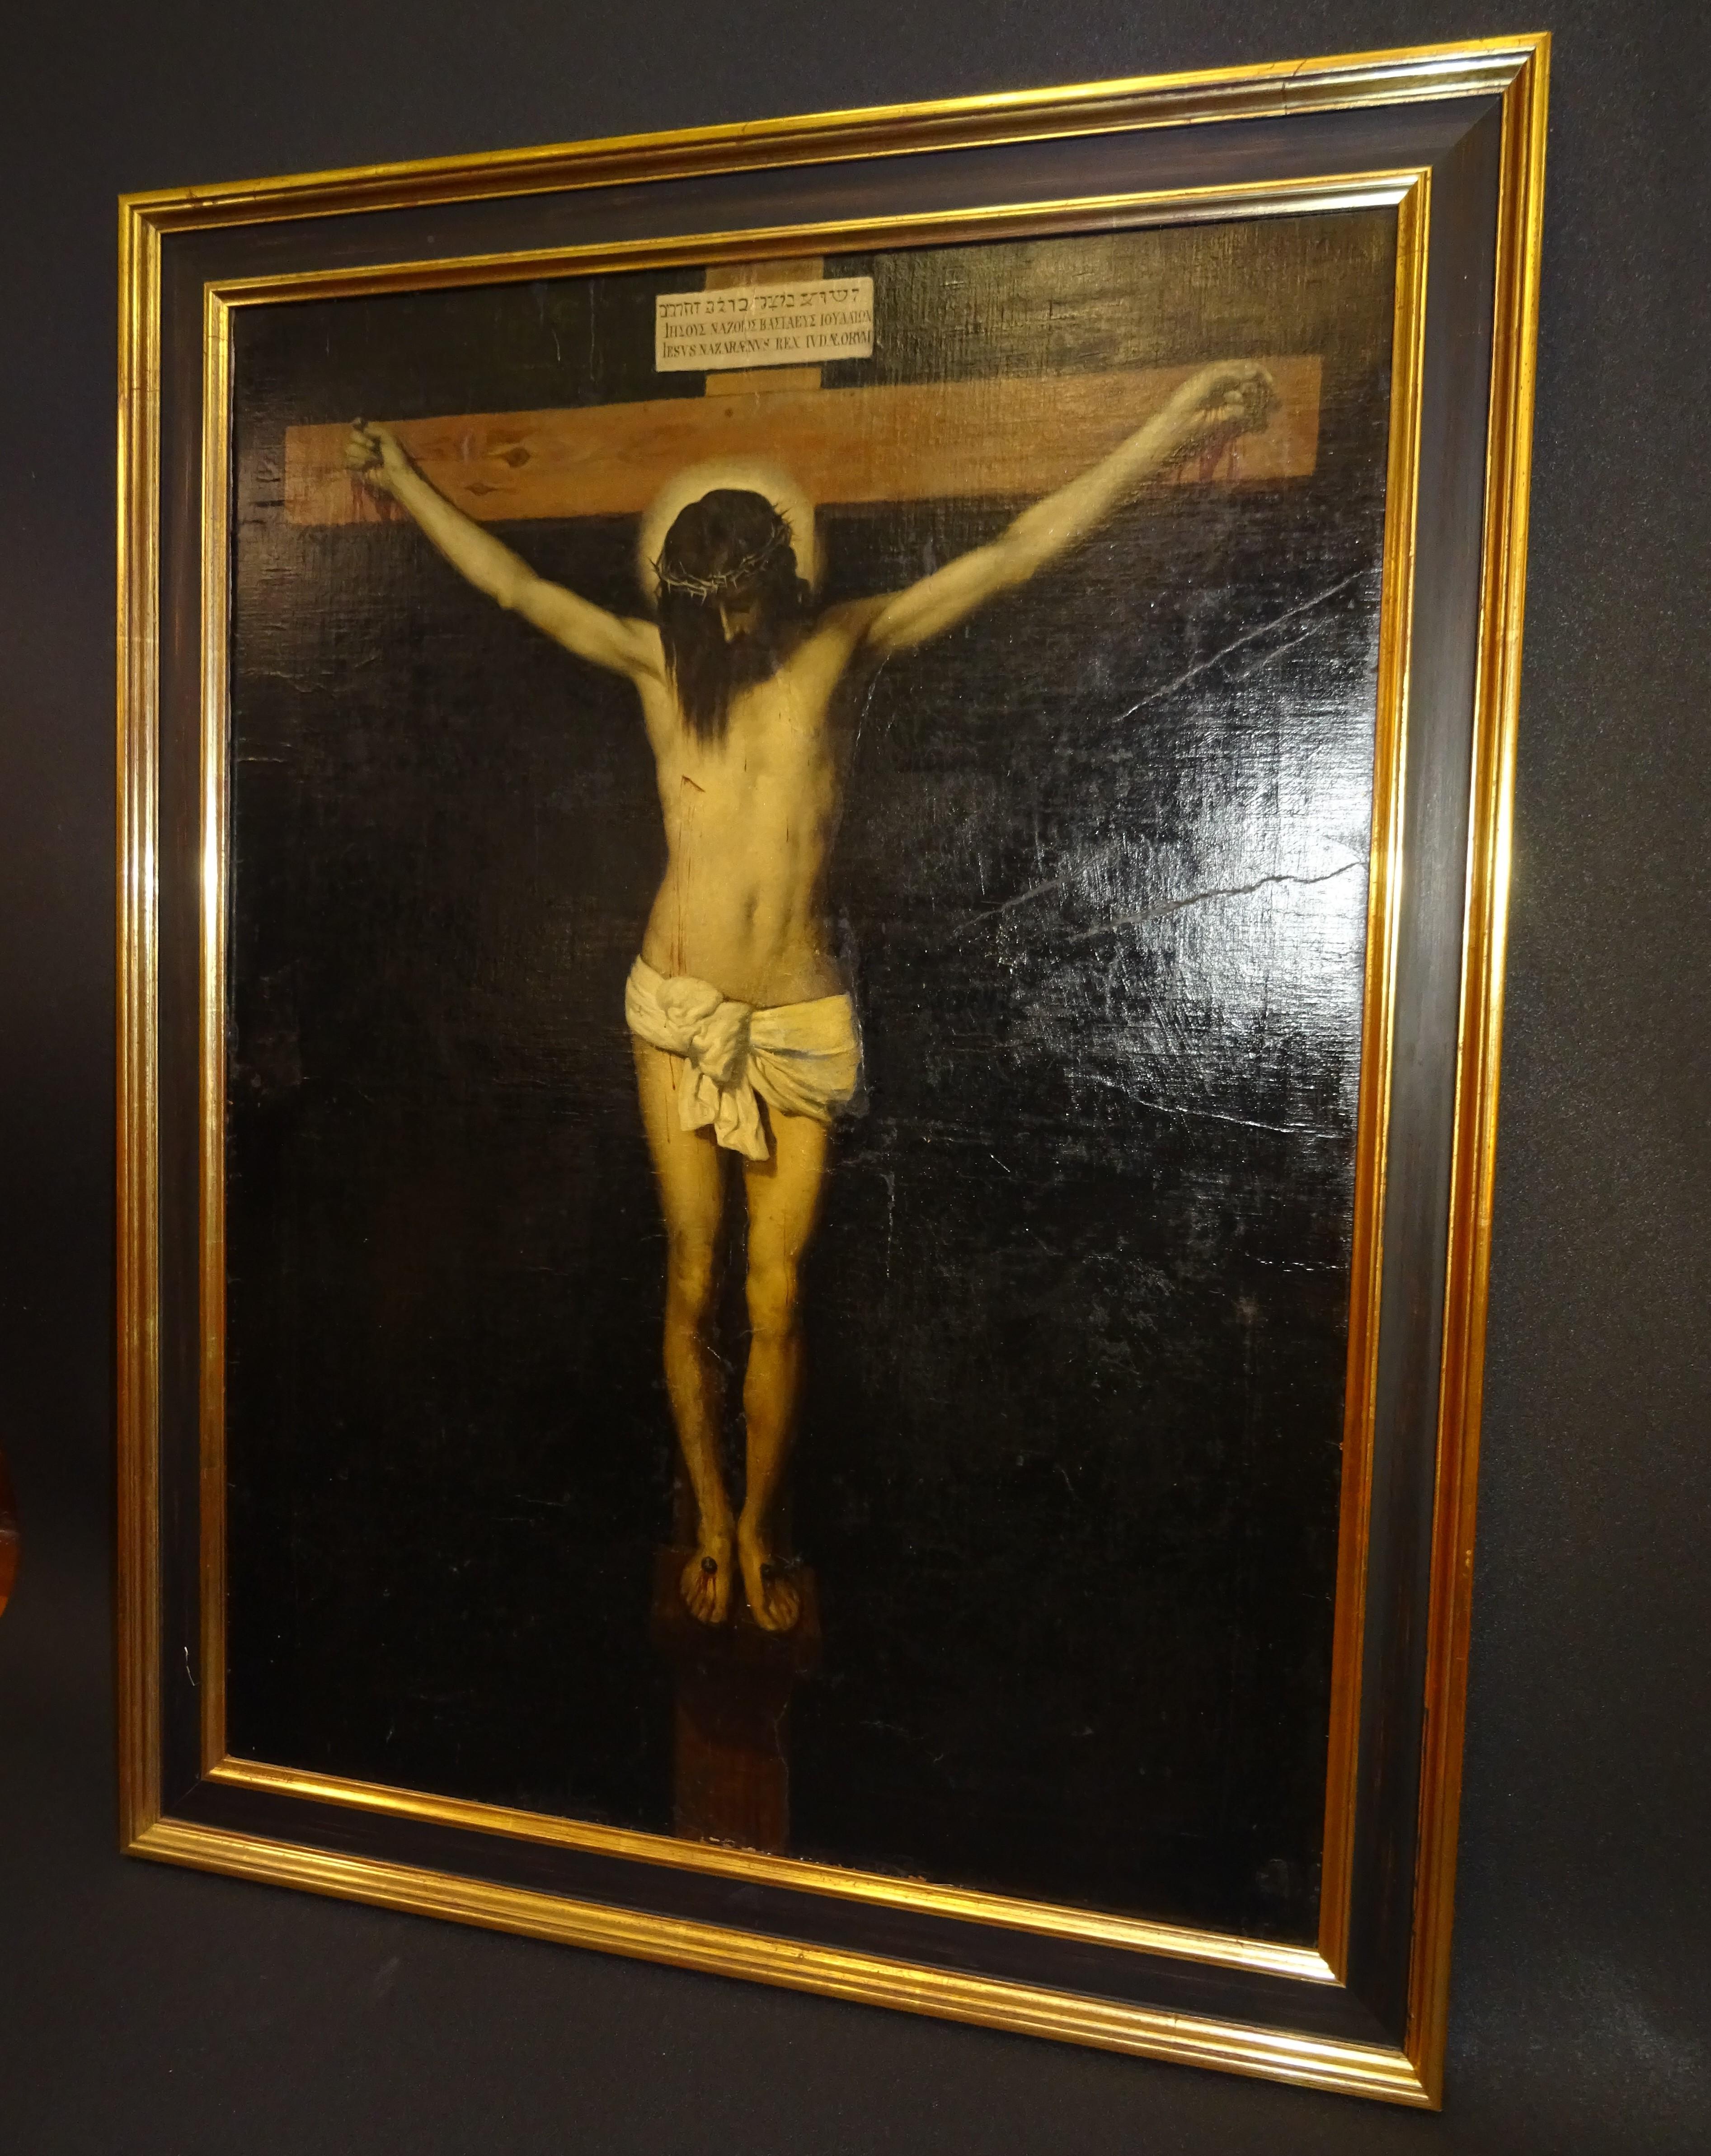 Baroque 19th Century after Spanish Painter Velazquez Christ Oil on Canvas and Wood Frame